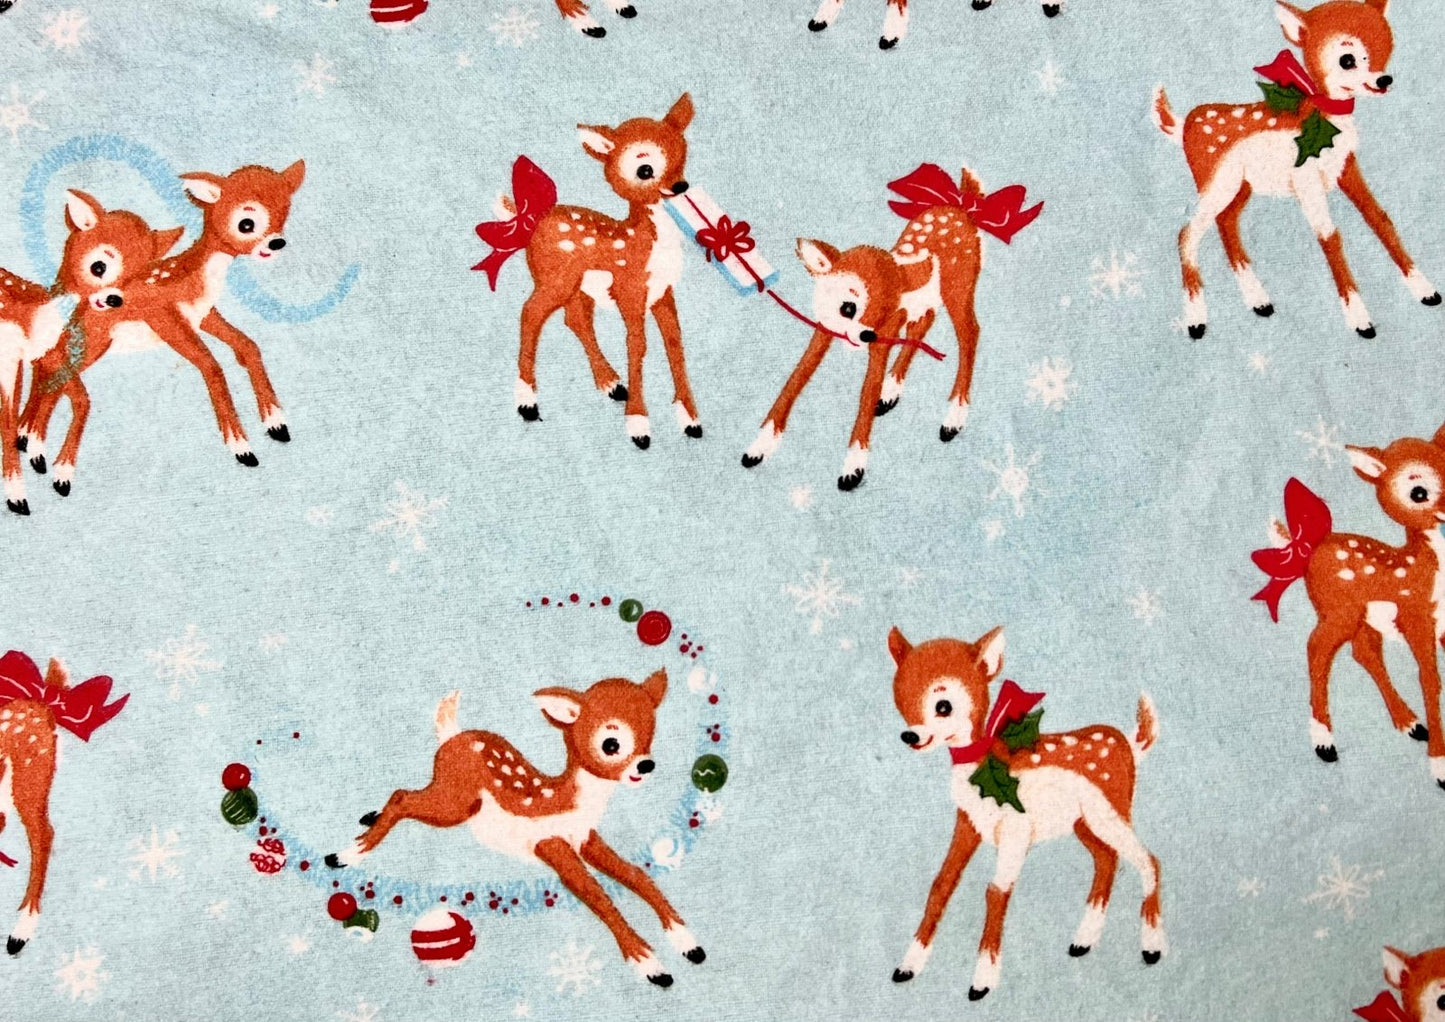 Mini-Throw Quilt- Playful Reindeer Babies - The Southern Nest